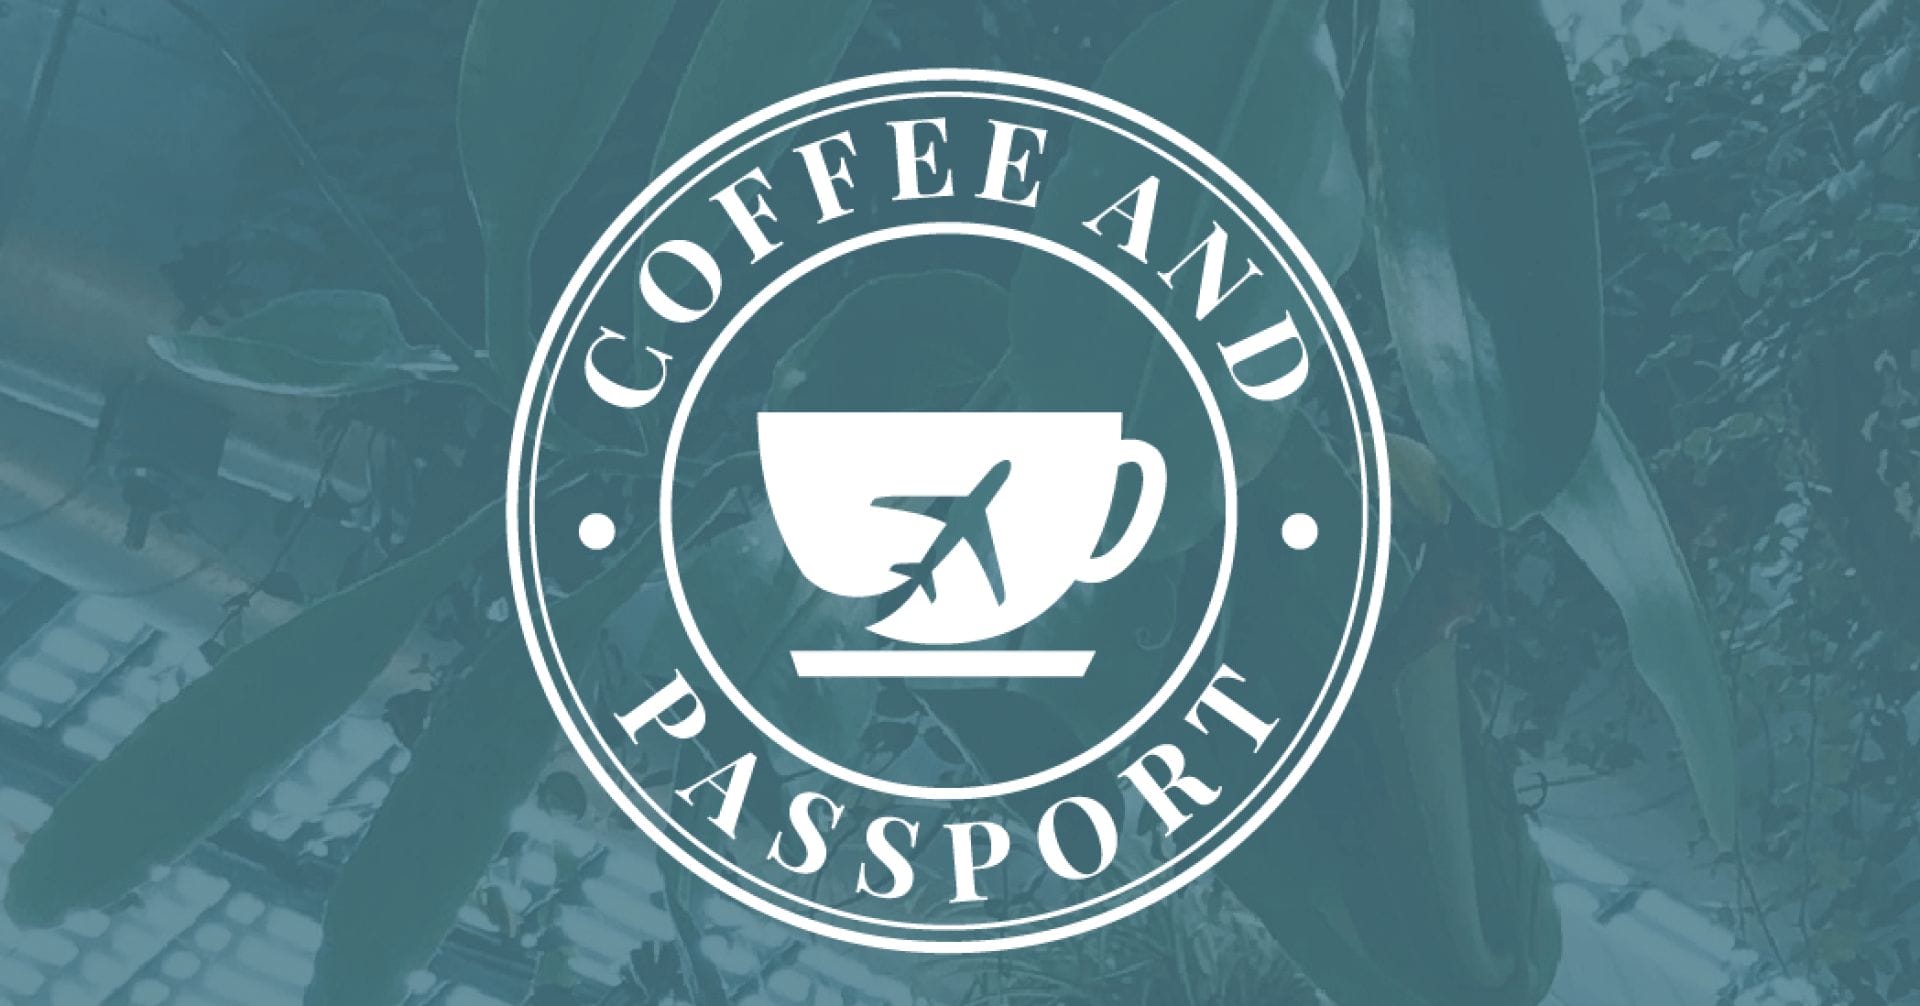 A passport stamp inspired logo, with a coffee cup in the center. The cup has a plane flying through it.